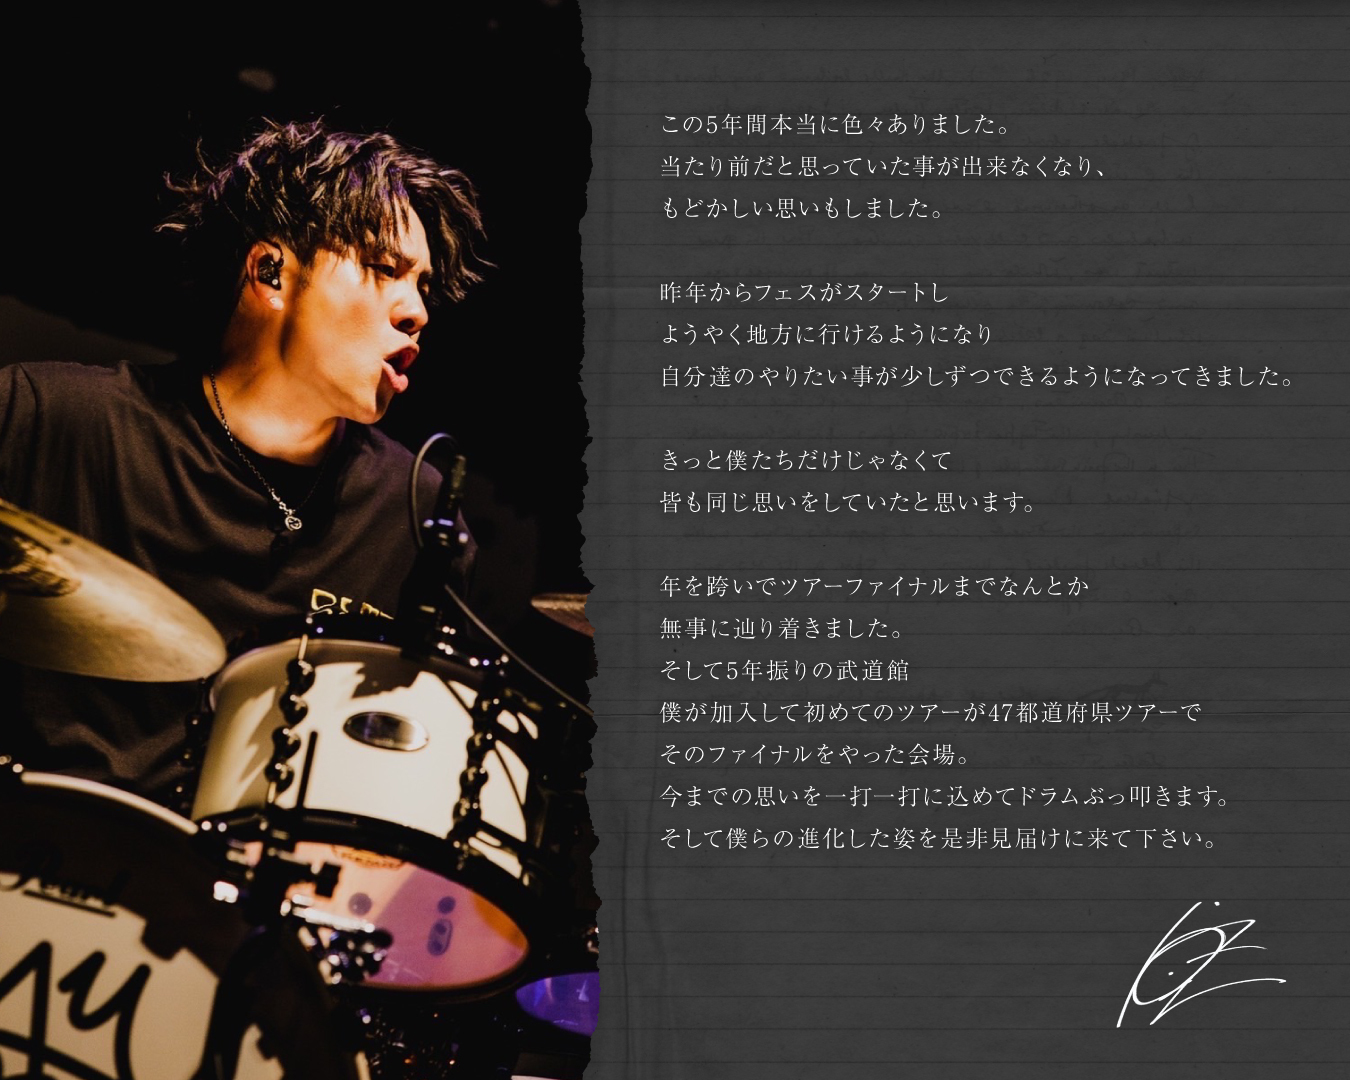 We promise, 4 you once again Tour Final at BUDOKAN" Message from